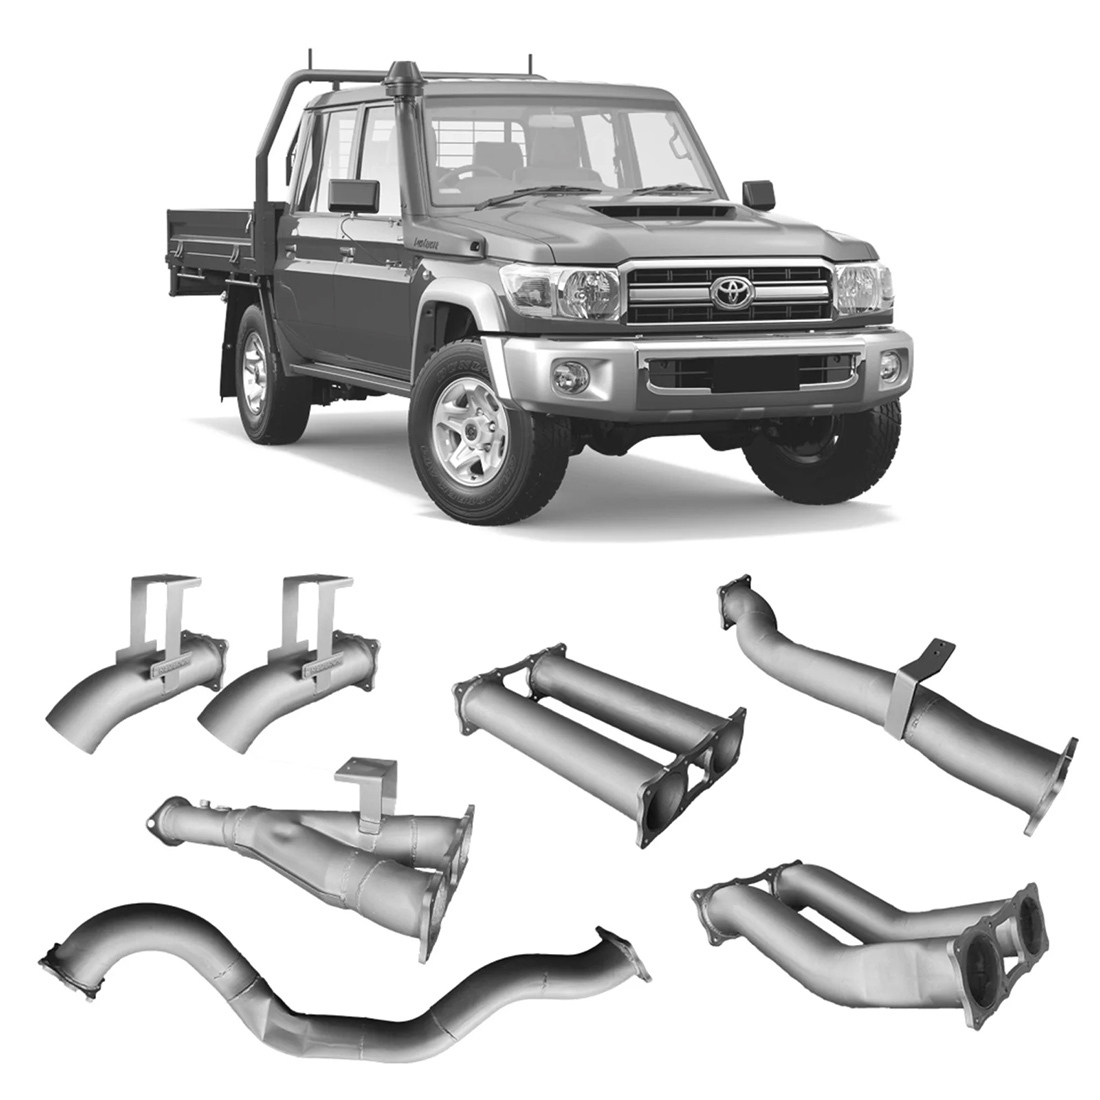 Redback Extreme Duty Twin 4" Exhaust for Toyota Landcruiser 79 Series Dual Cab image